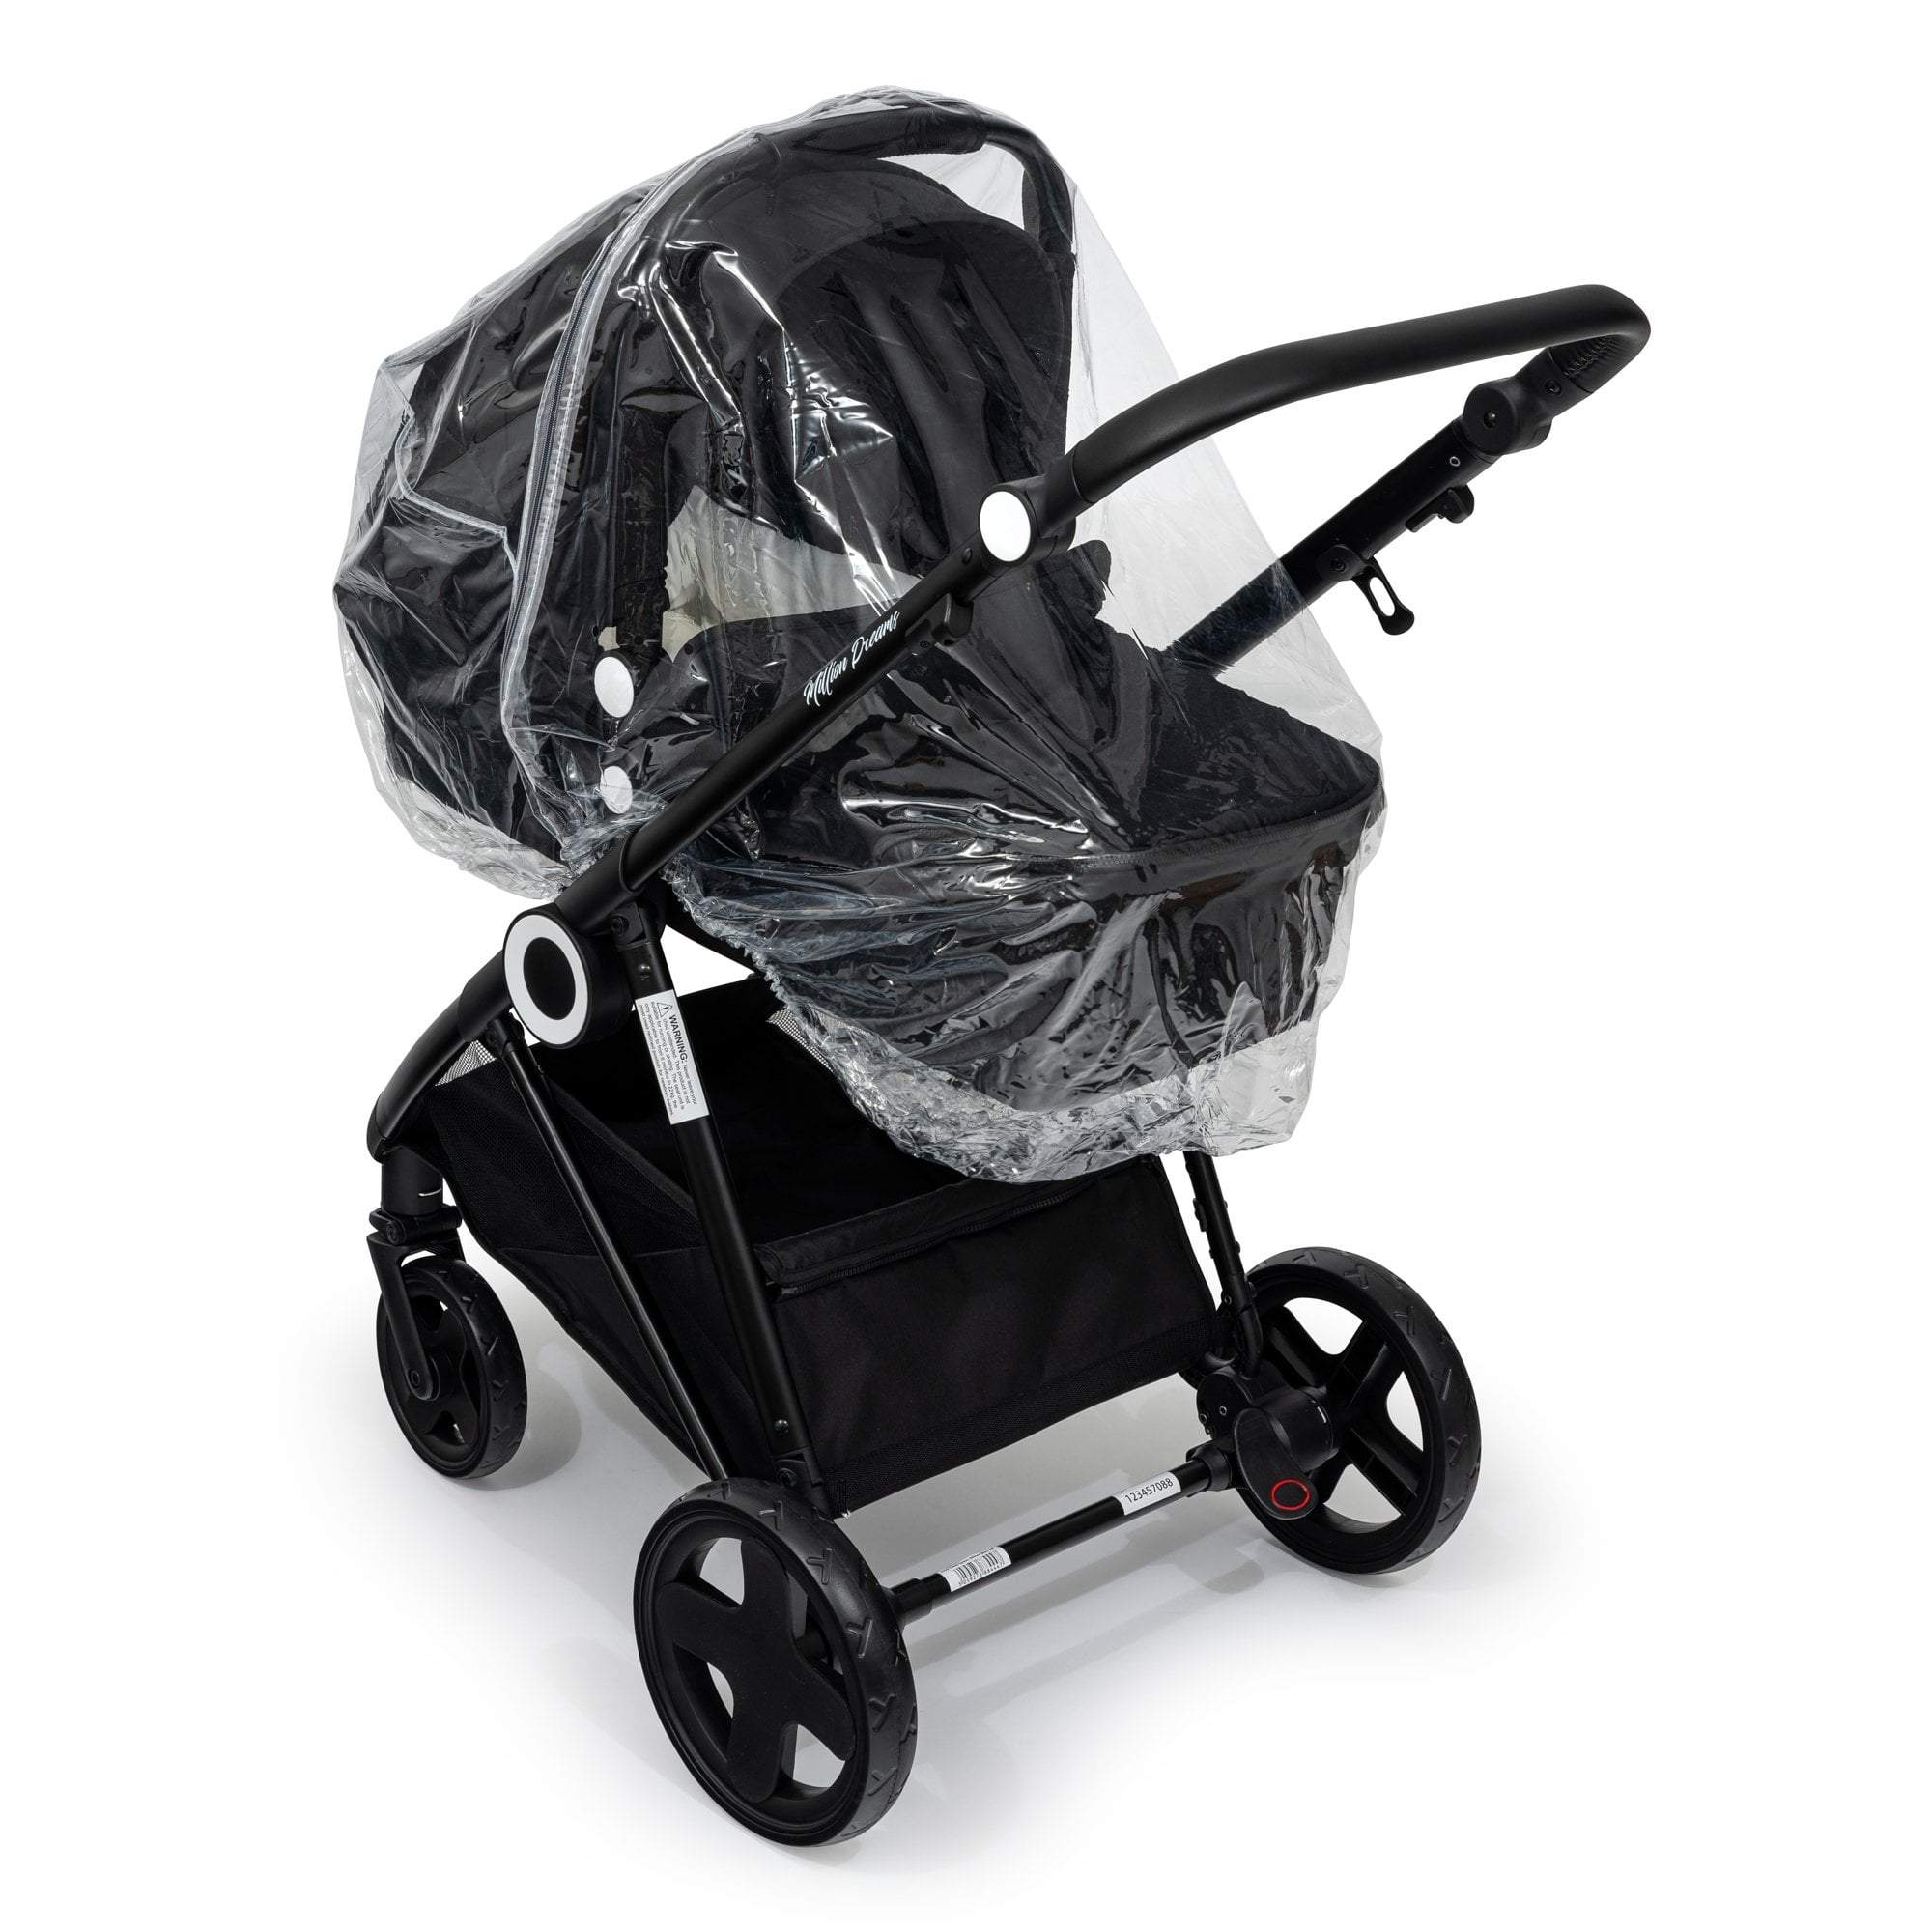 Carrycot Raincover Compatible With Hartan - Fits All Models - For Your Little One